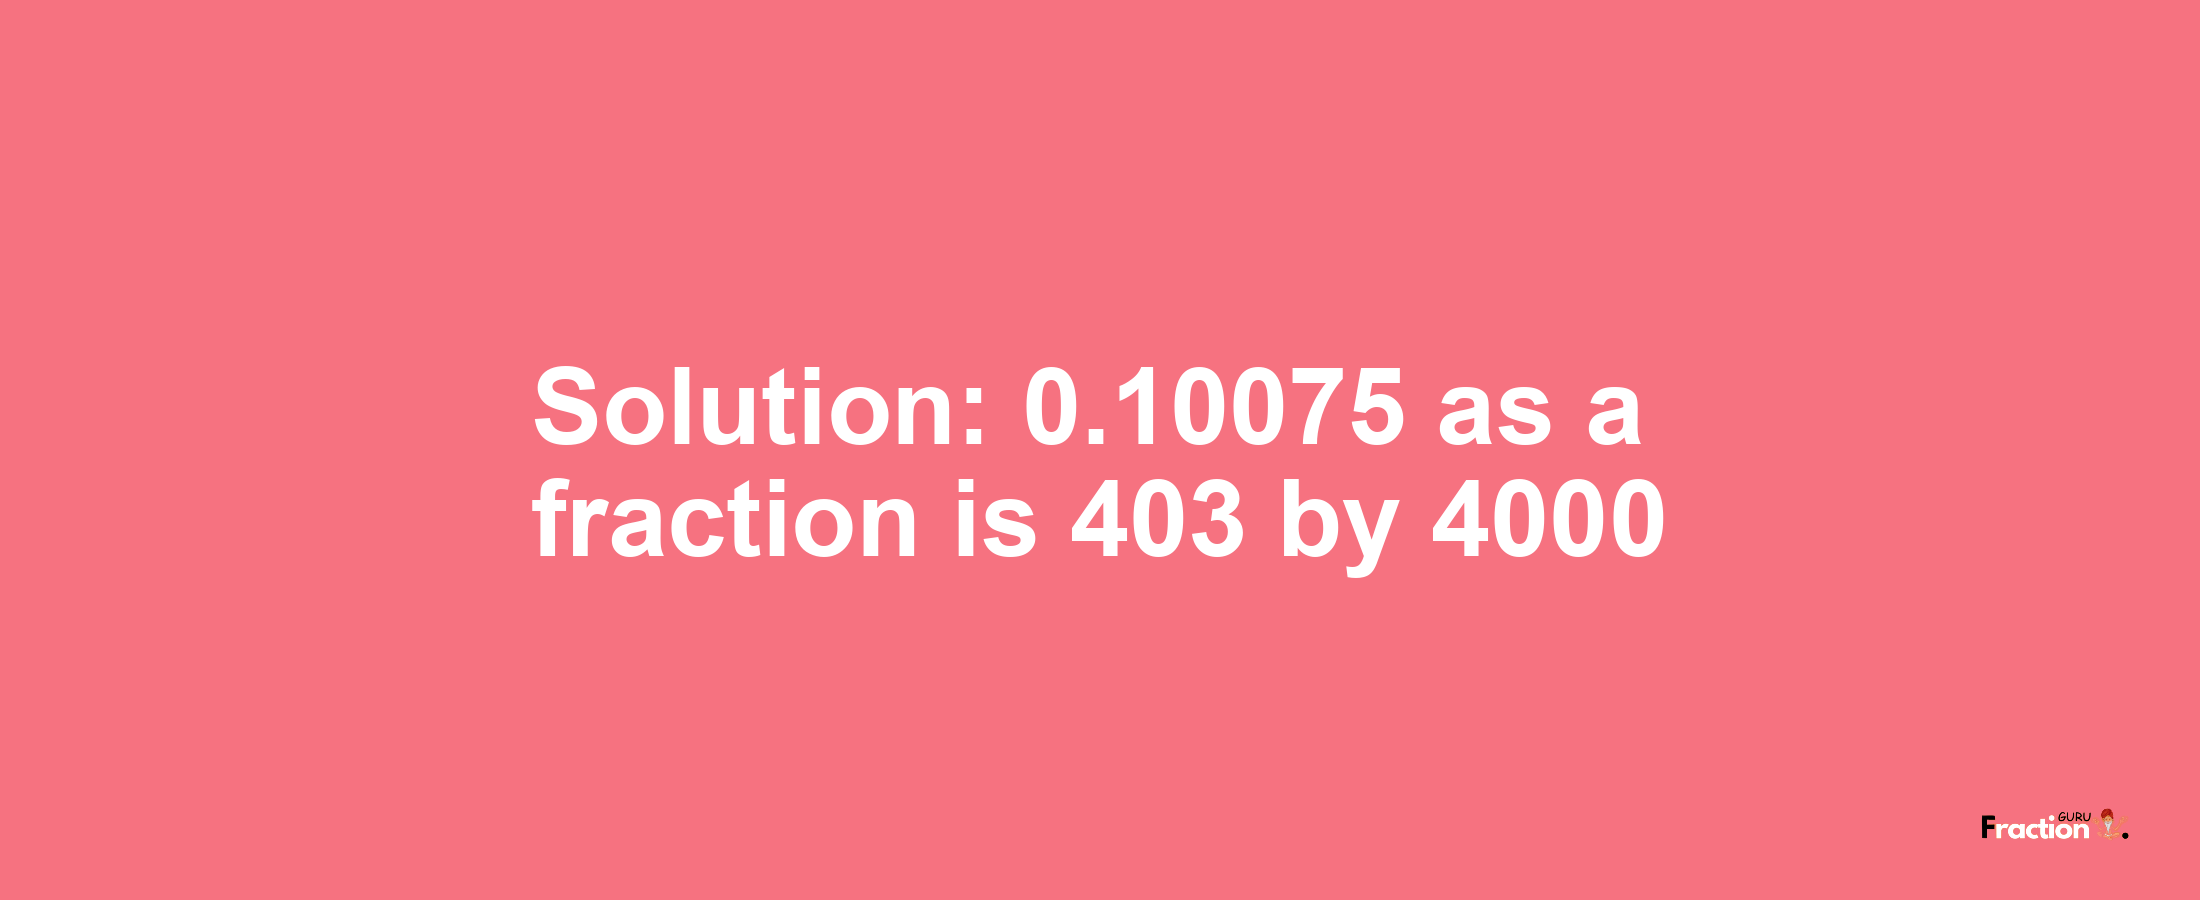 Solution:0.10075 as a fraction is 403/4000